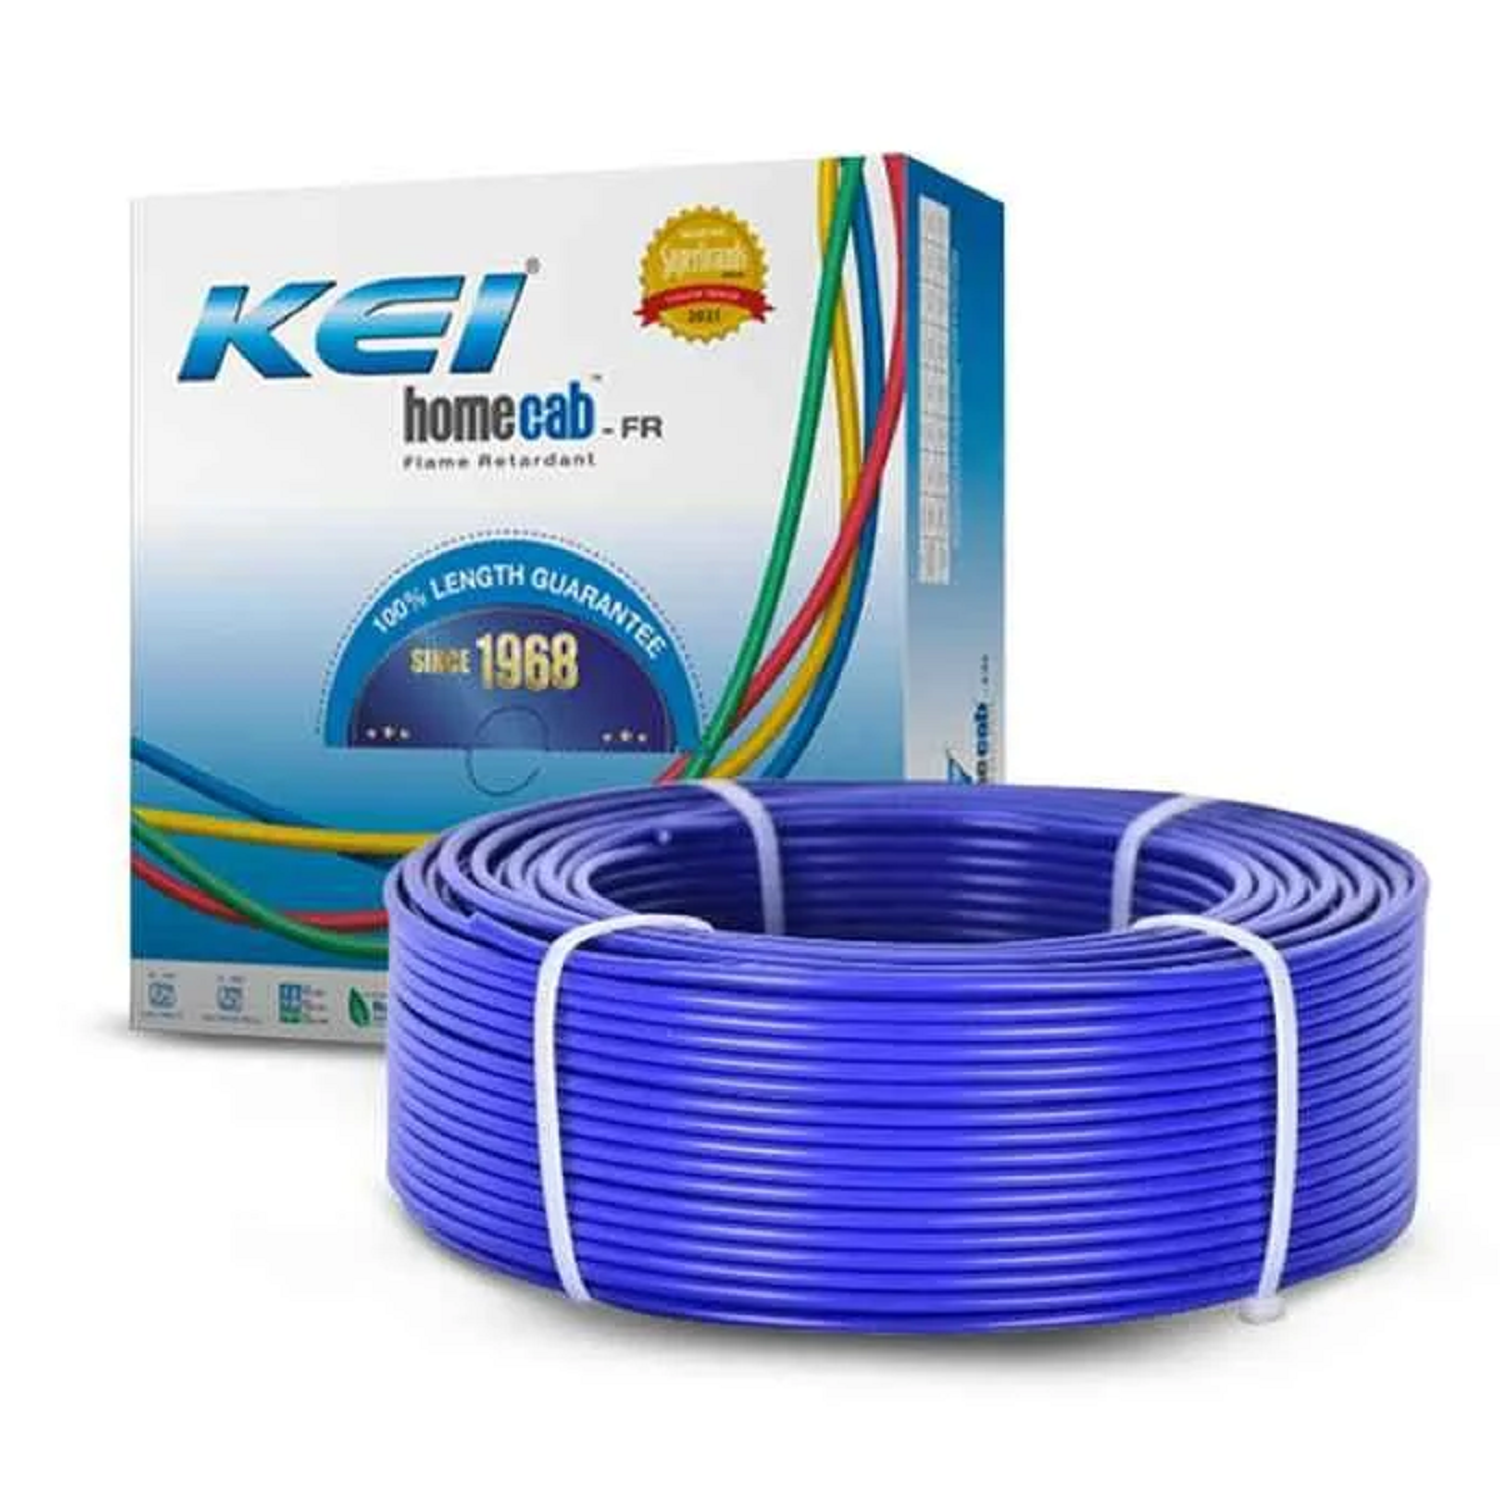 1.0 Sqmm KEI FR Single Core Copper Wire 90 MTR With PVC Insulated for House 38 Industrial (Blue)